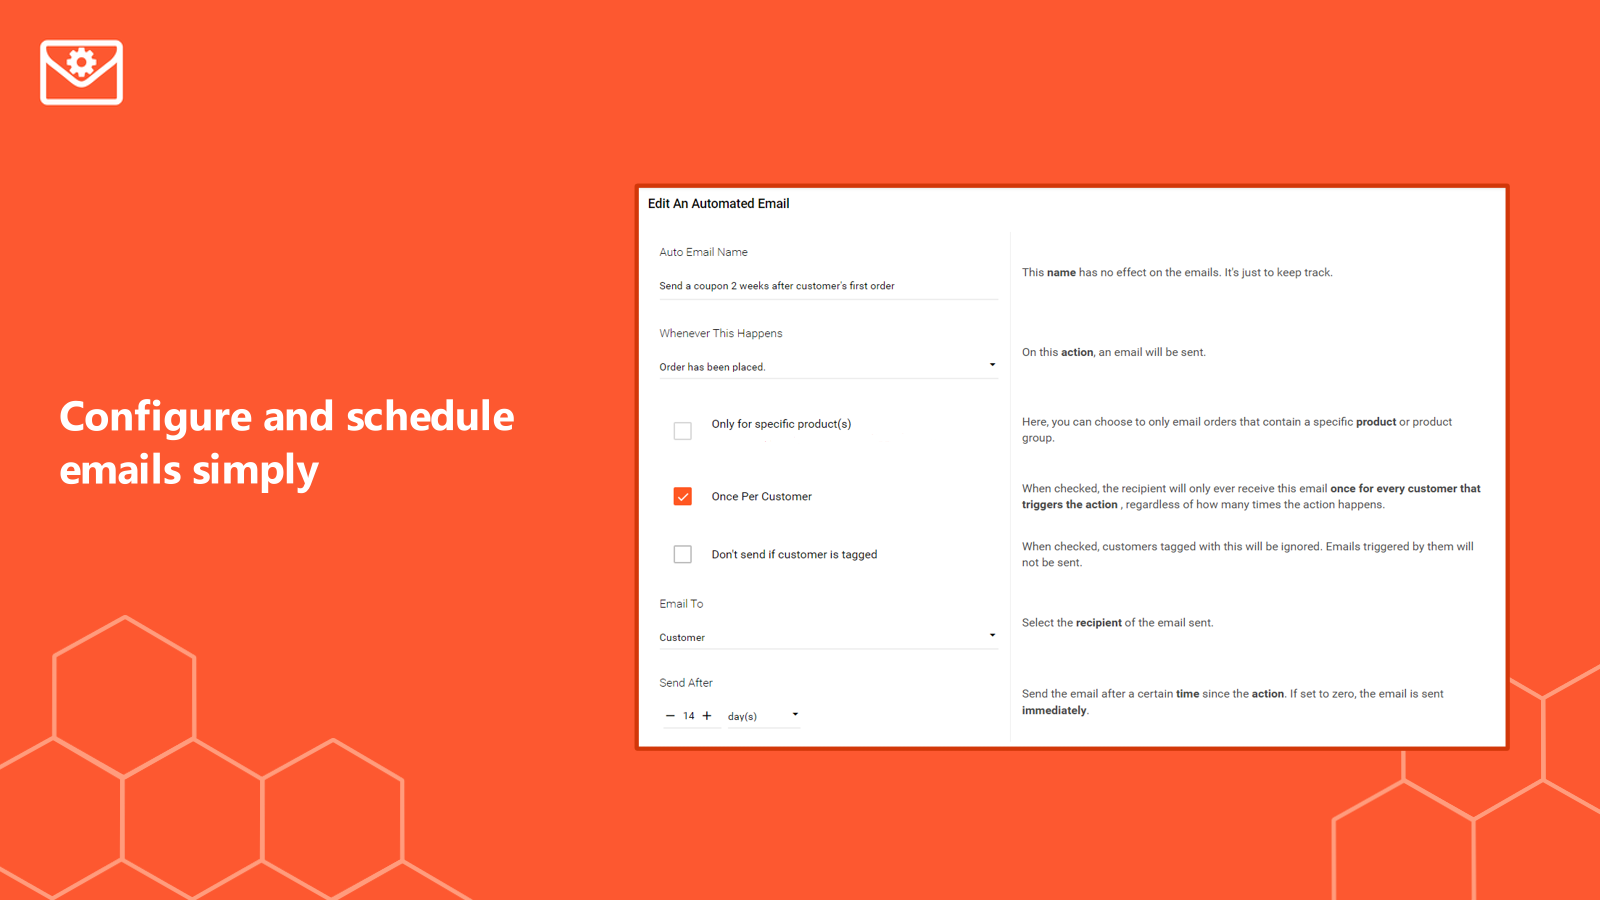 Configure and schedule emails simply